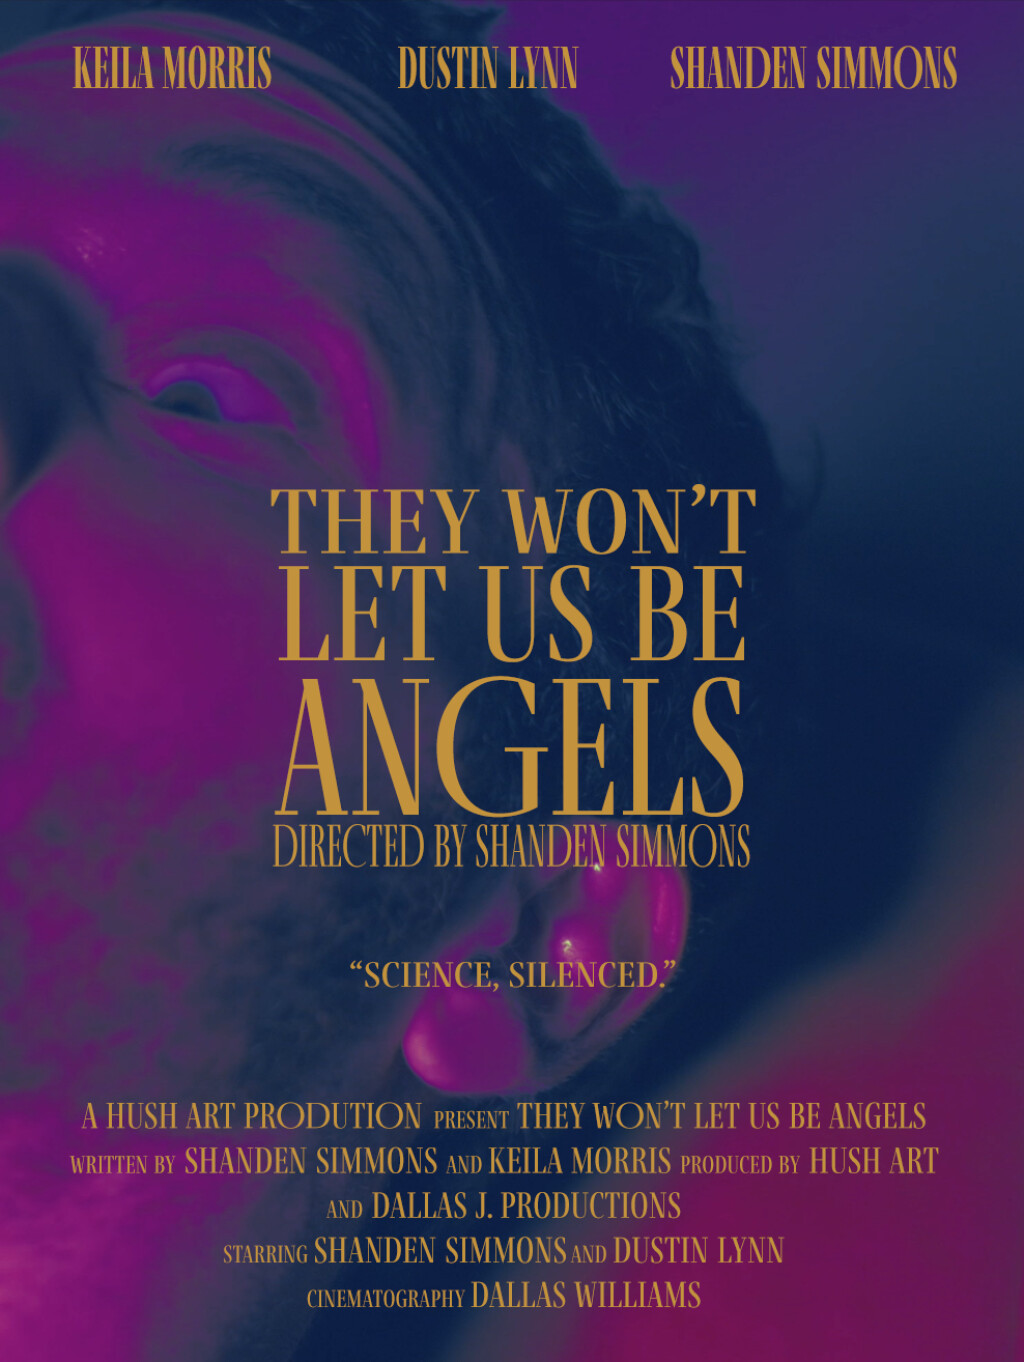 Filmposter for They Won't Let Us Be Angels